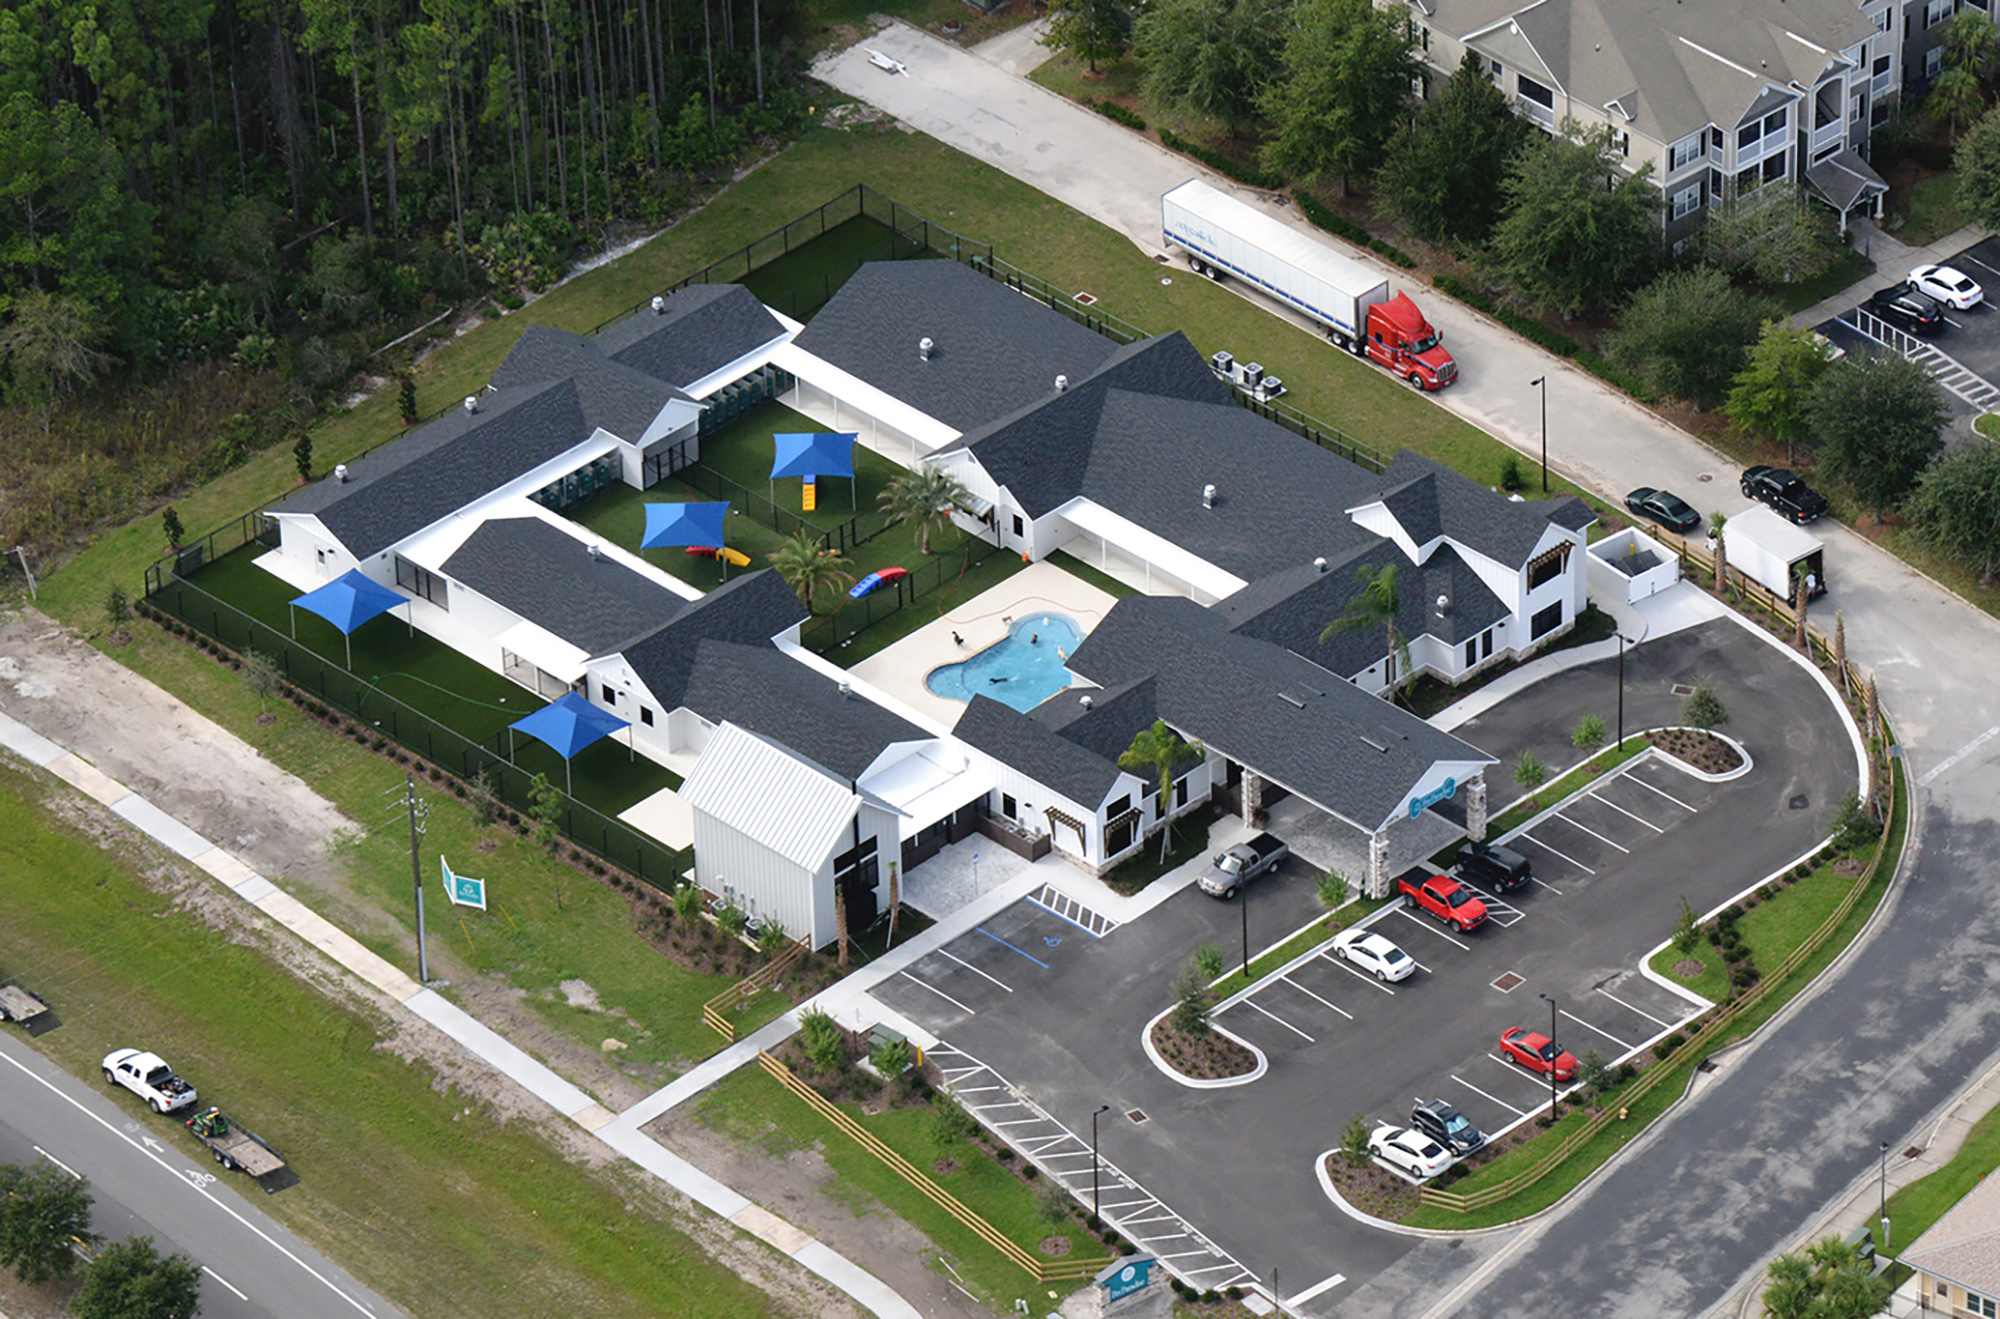 Pet Paradise said its Clay County resort will be similar to its new facility in the Bartram area.